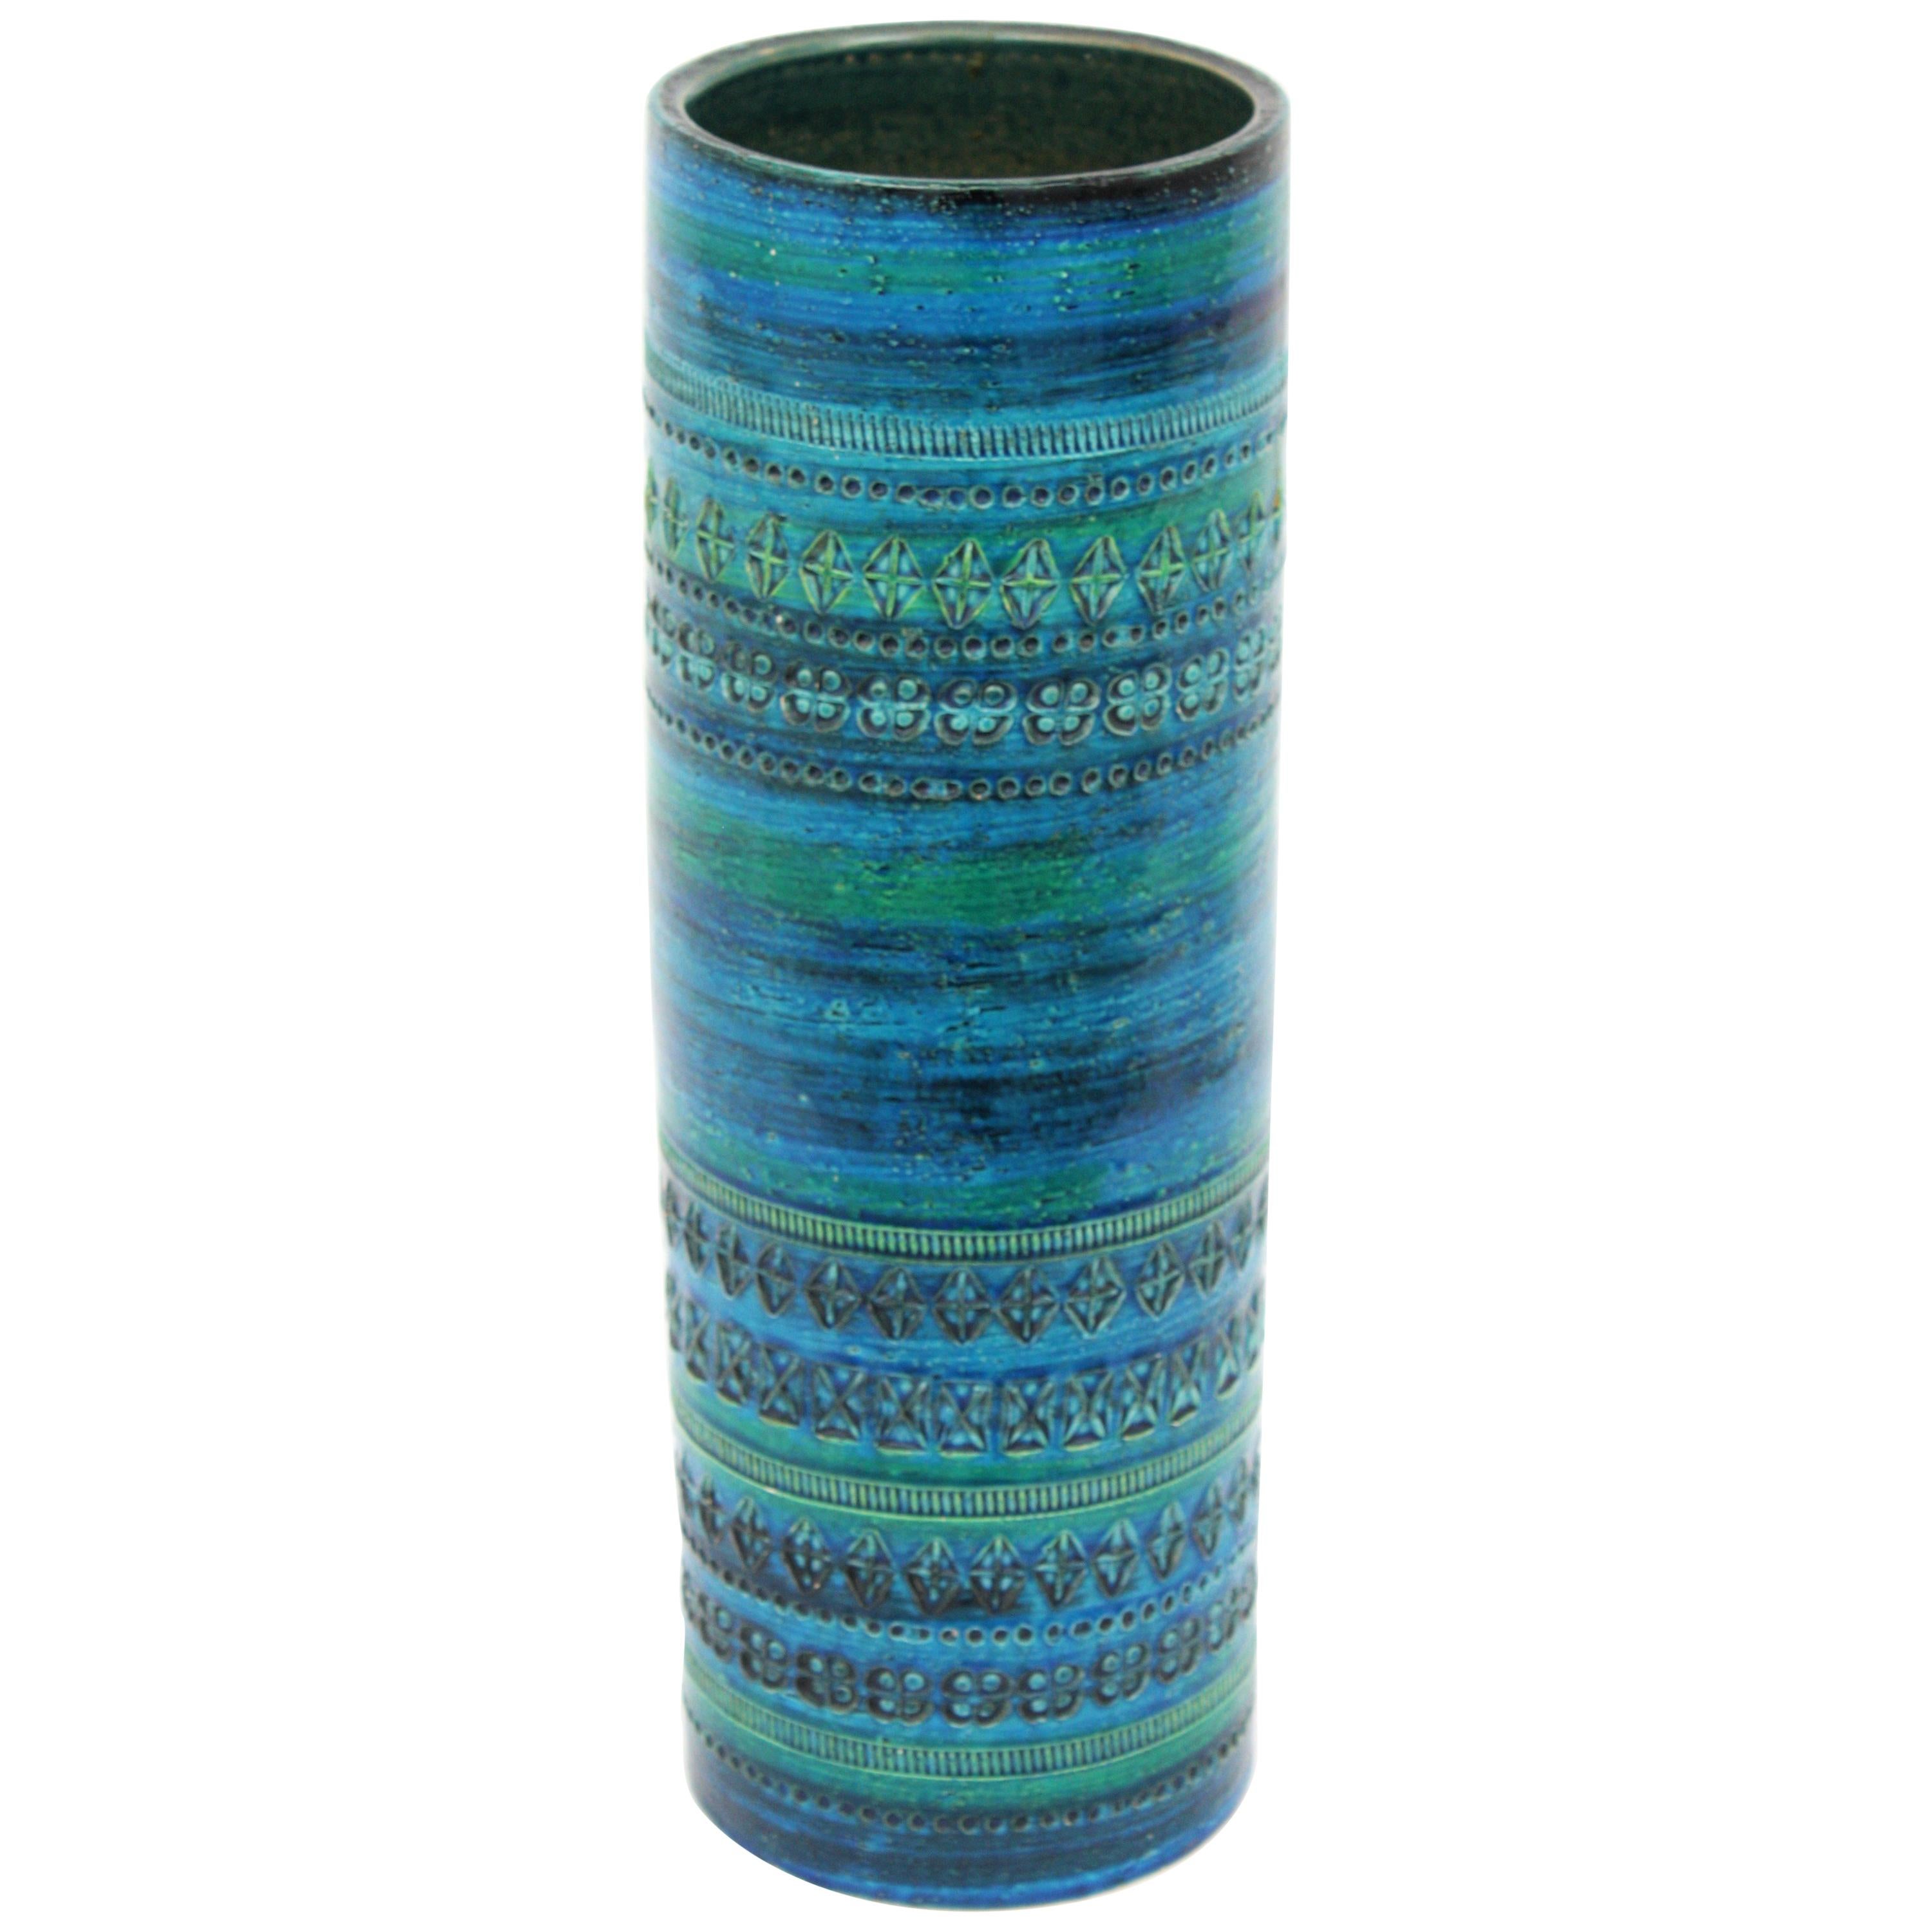 A giant sized handmade Rimini blue ceramic vase designed by Aldo Londi and manufactured by Bitossi. Italy, 1960s.
Blue glazed ceramic with engraved patterns adorning the top of the vase and the bottom. Its gorgeous shades of blue and green and the